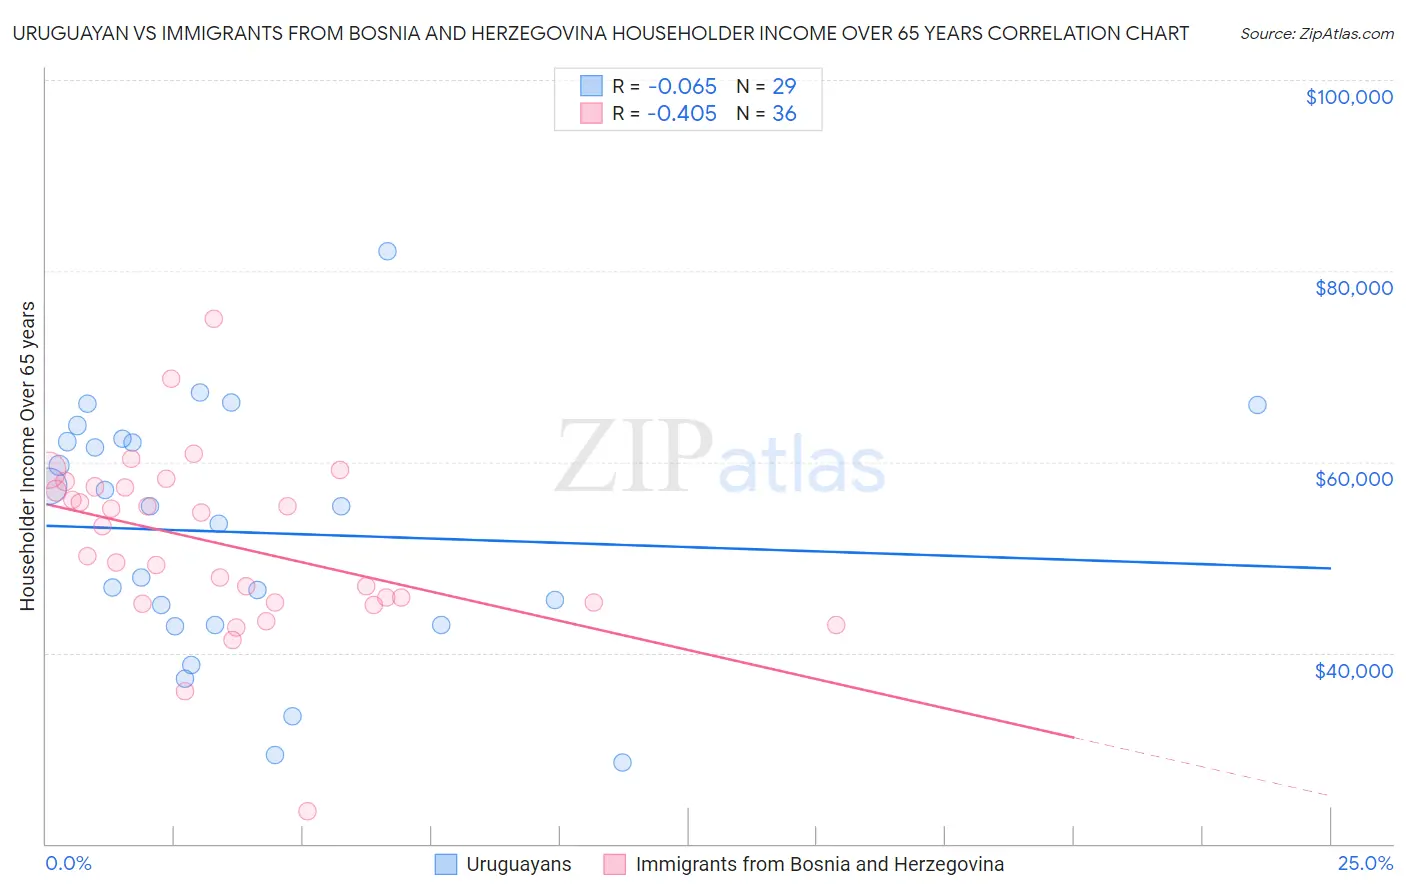 Uruguayan vs Immigrants from Bosnia and Herzegovina Householder Income Over 65 years